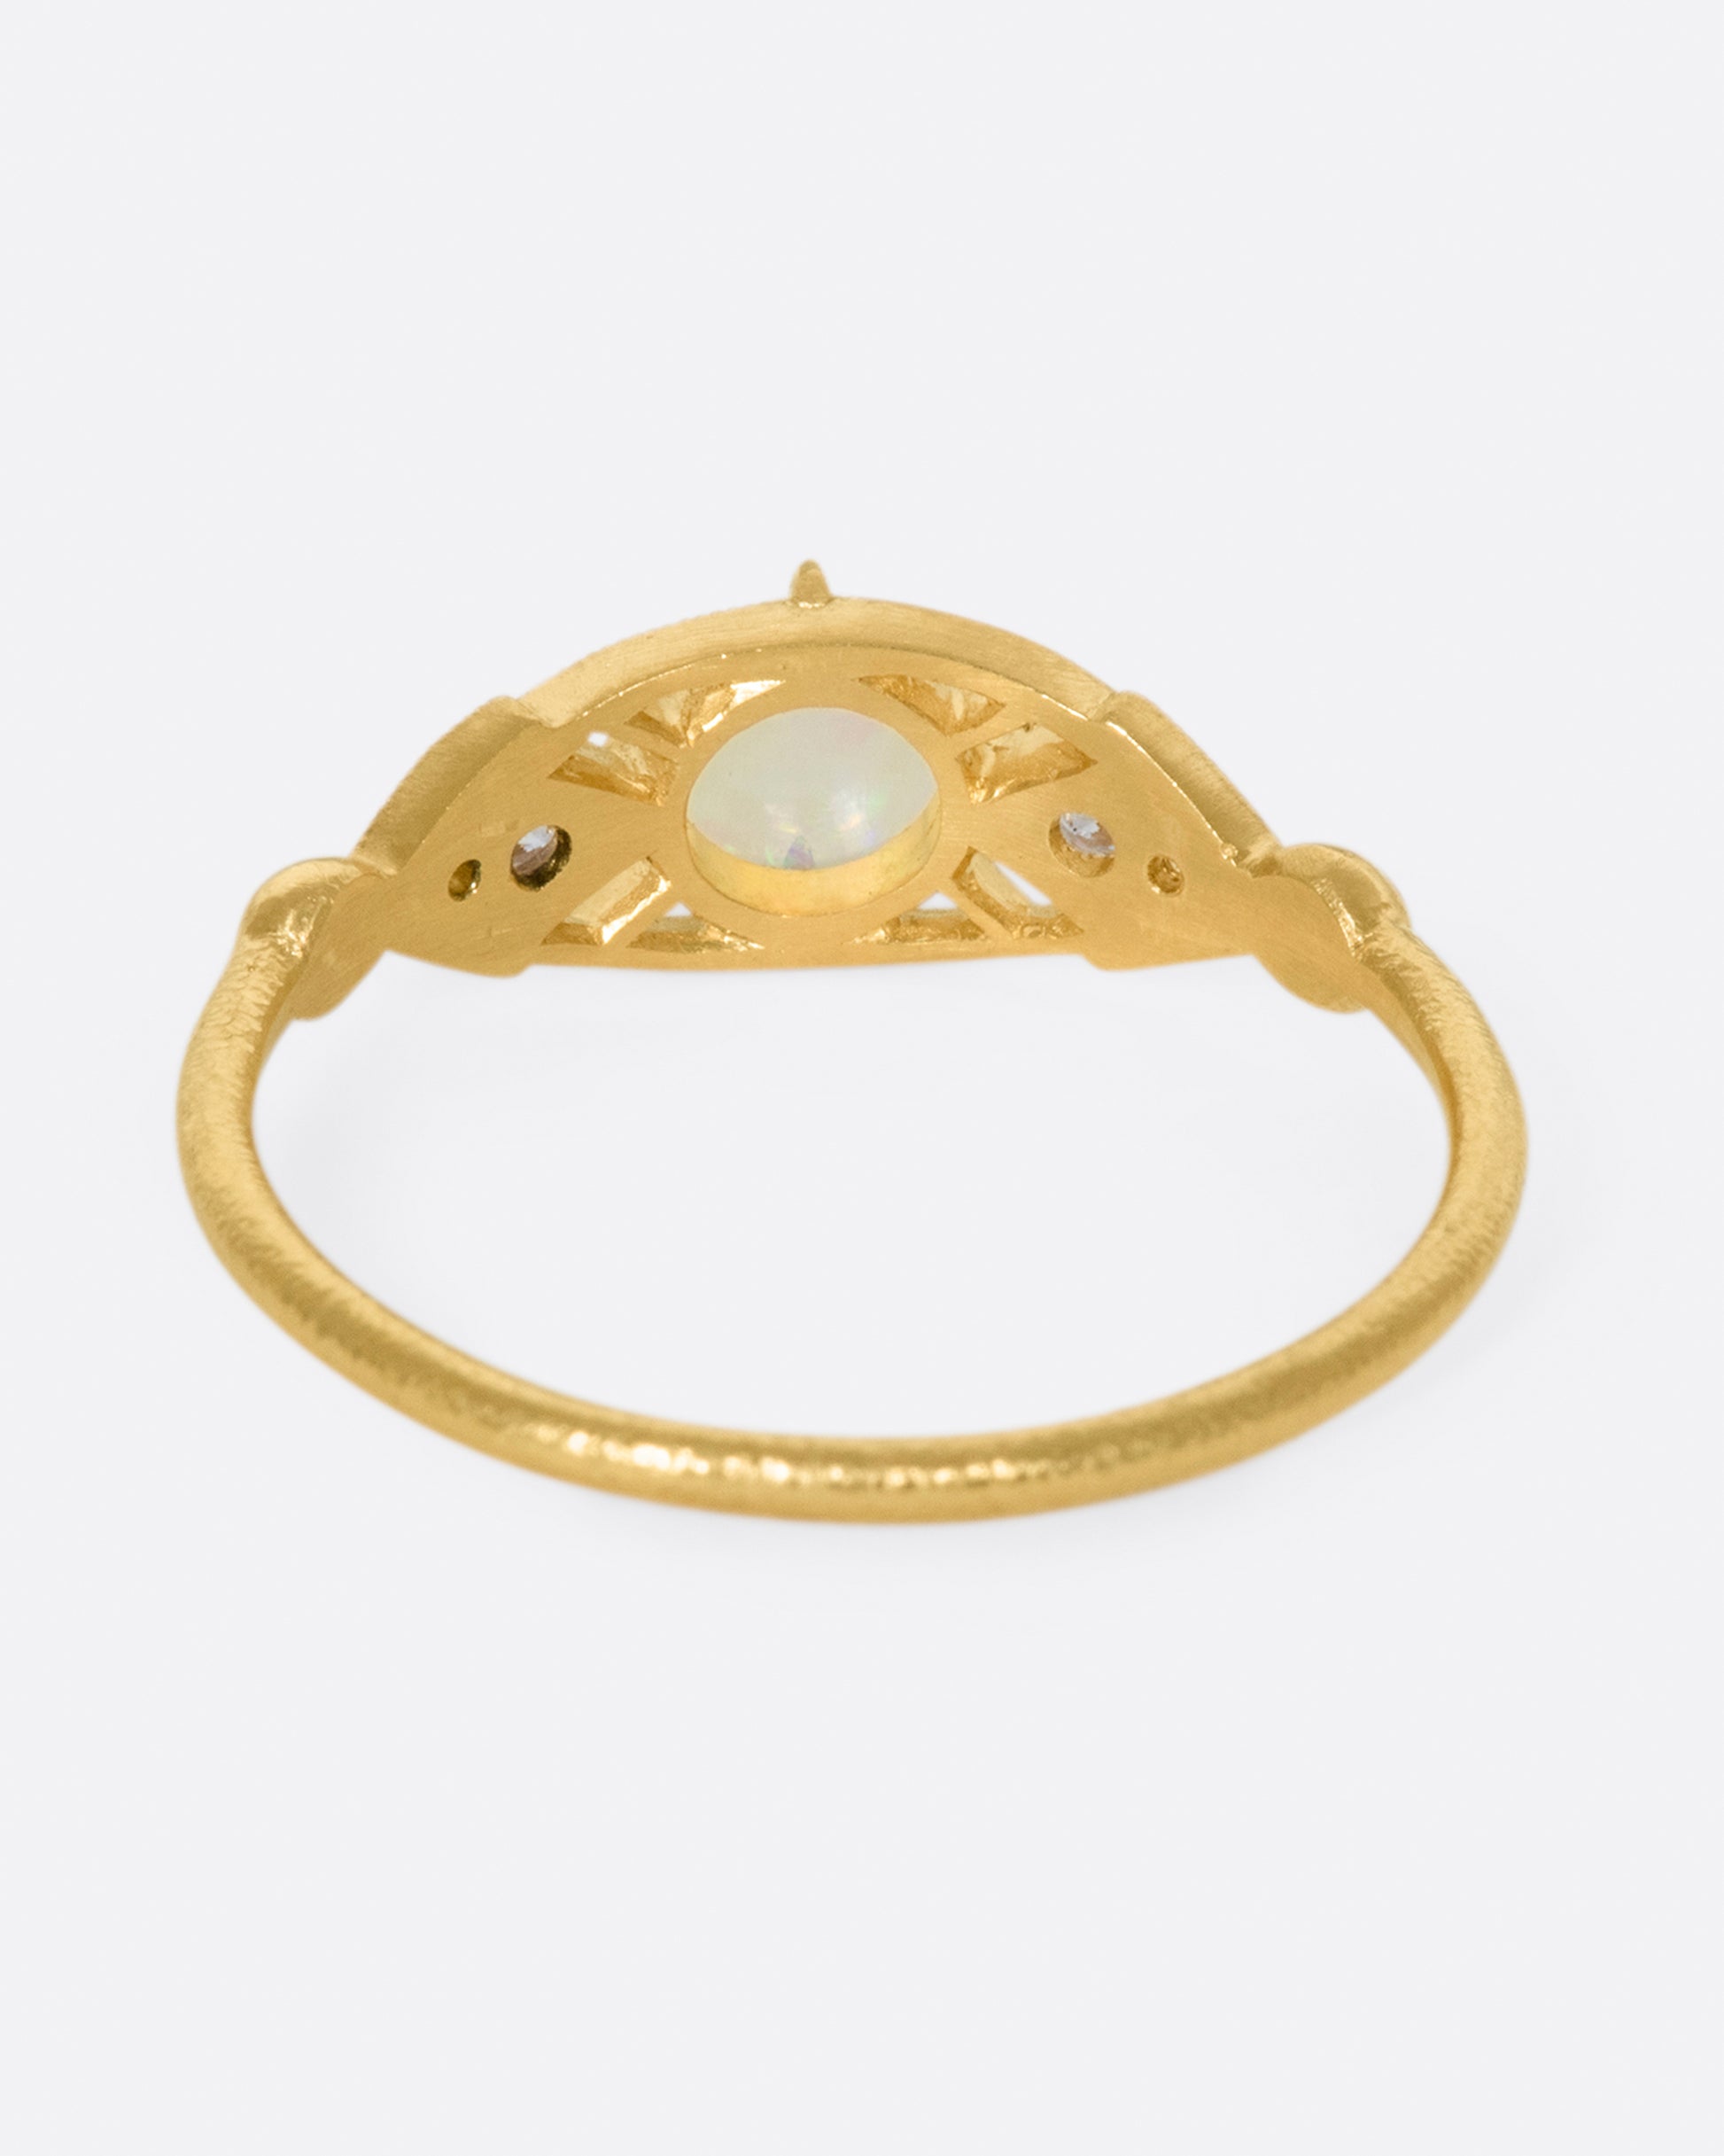 A glowy opal flanked with tiny, sparkly, diamonds, and set on a delicate band 14k gold band